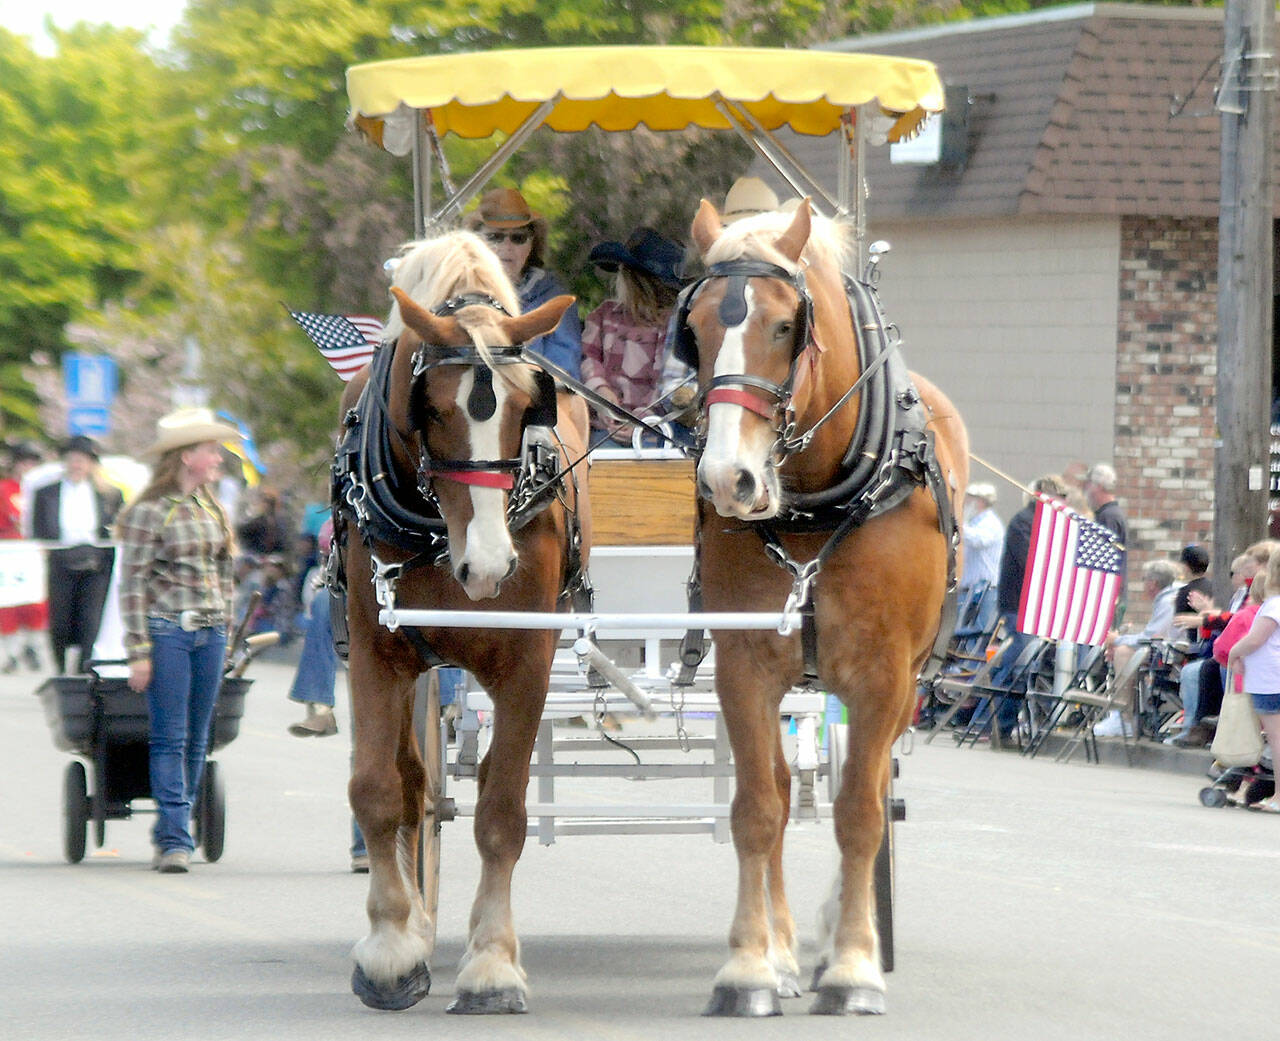 A pair of draft horses pull a wagon representing Blue Mountain Belgians in Saturday’s grand parade in Sequim. (Keith Thorpe/Peninsula Daily News)